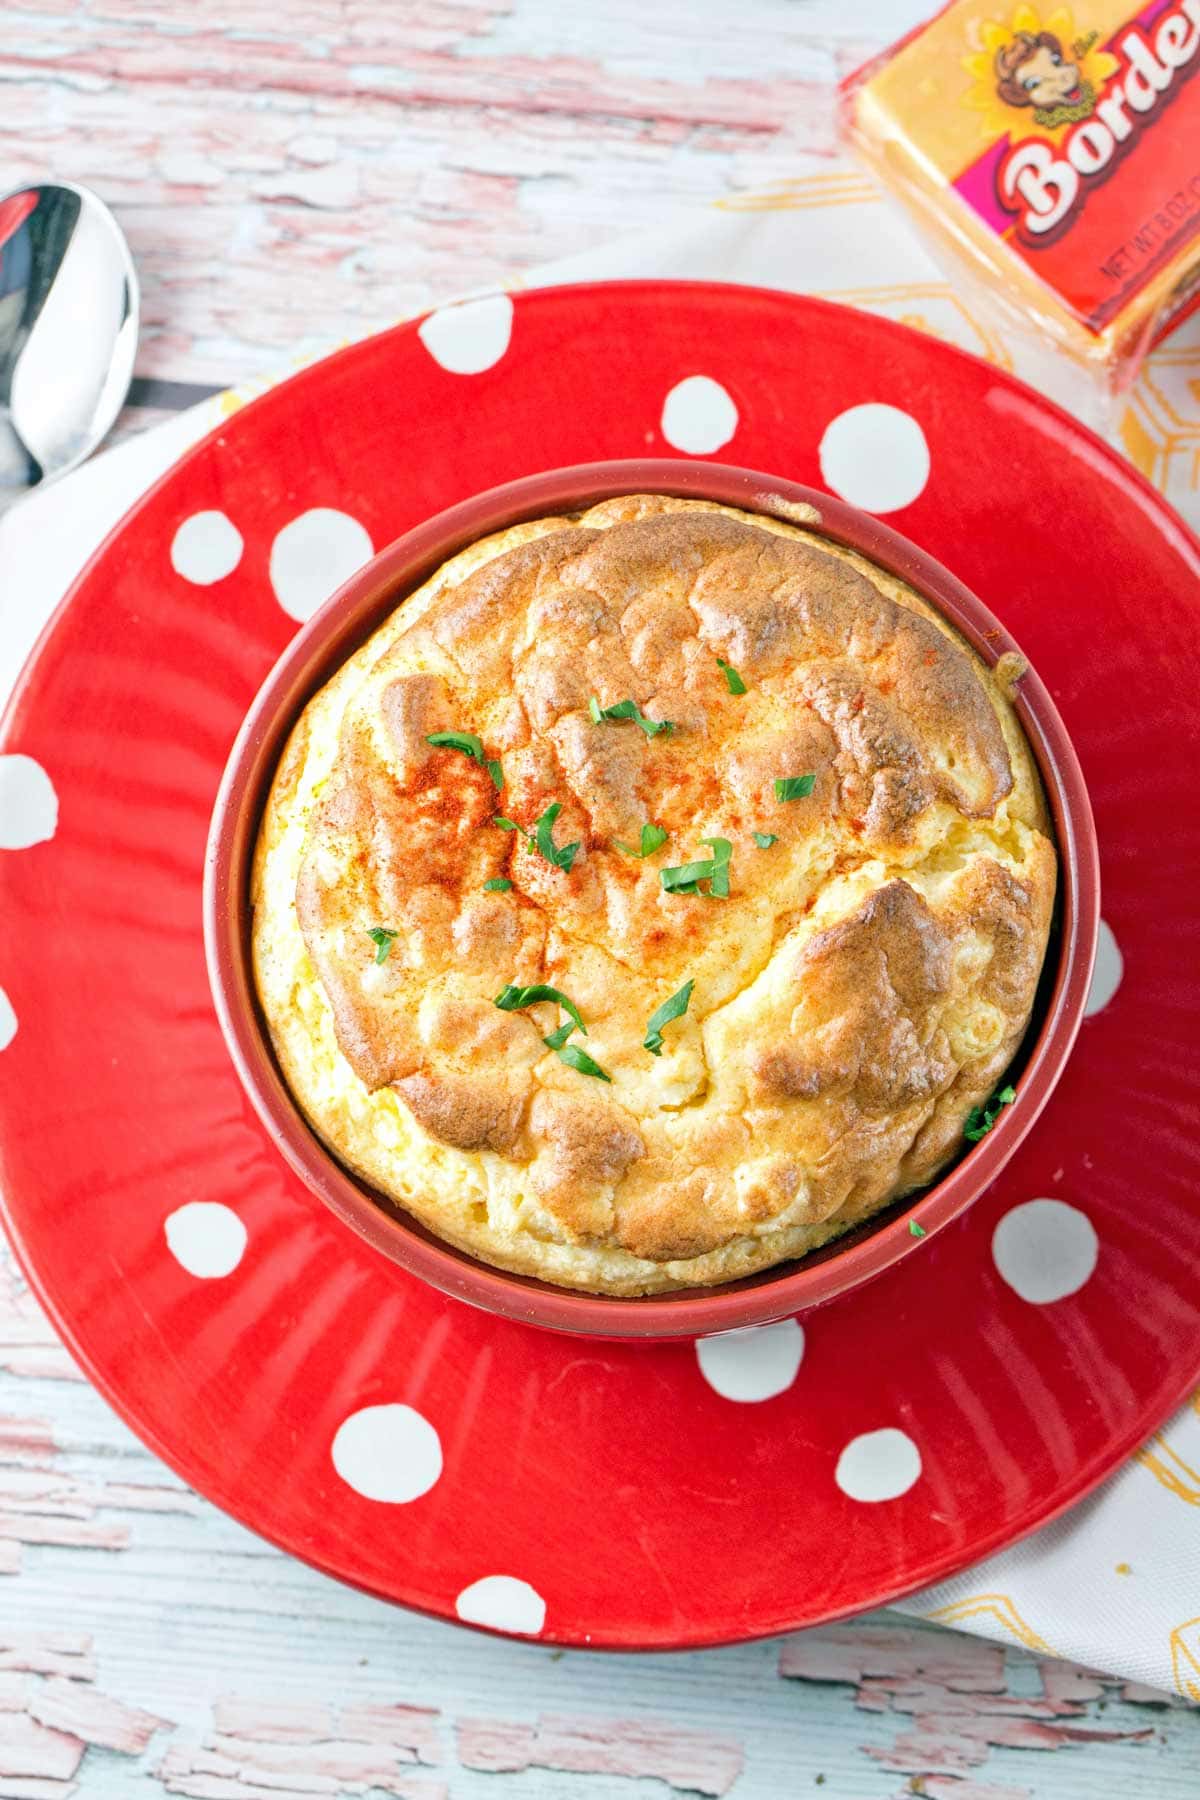 baked macaroni and cheese souffle with a browned cheesy top in a red ramekin